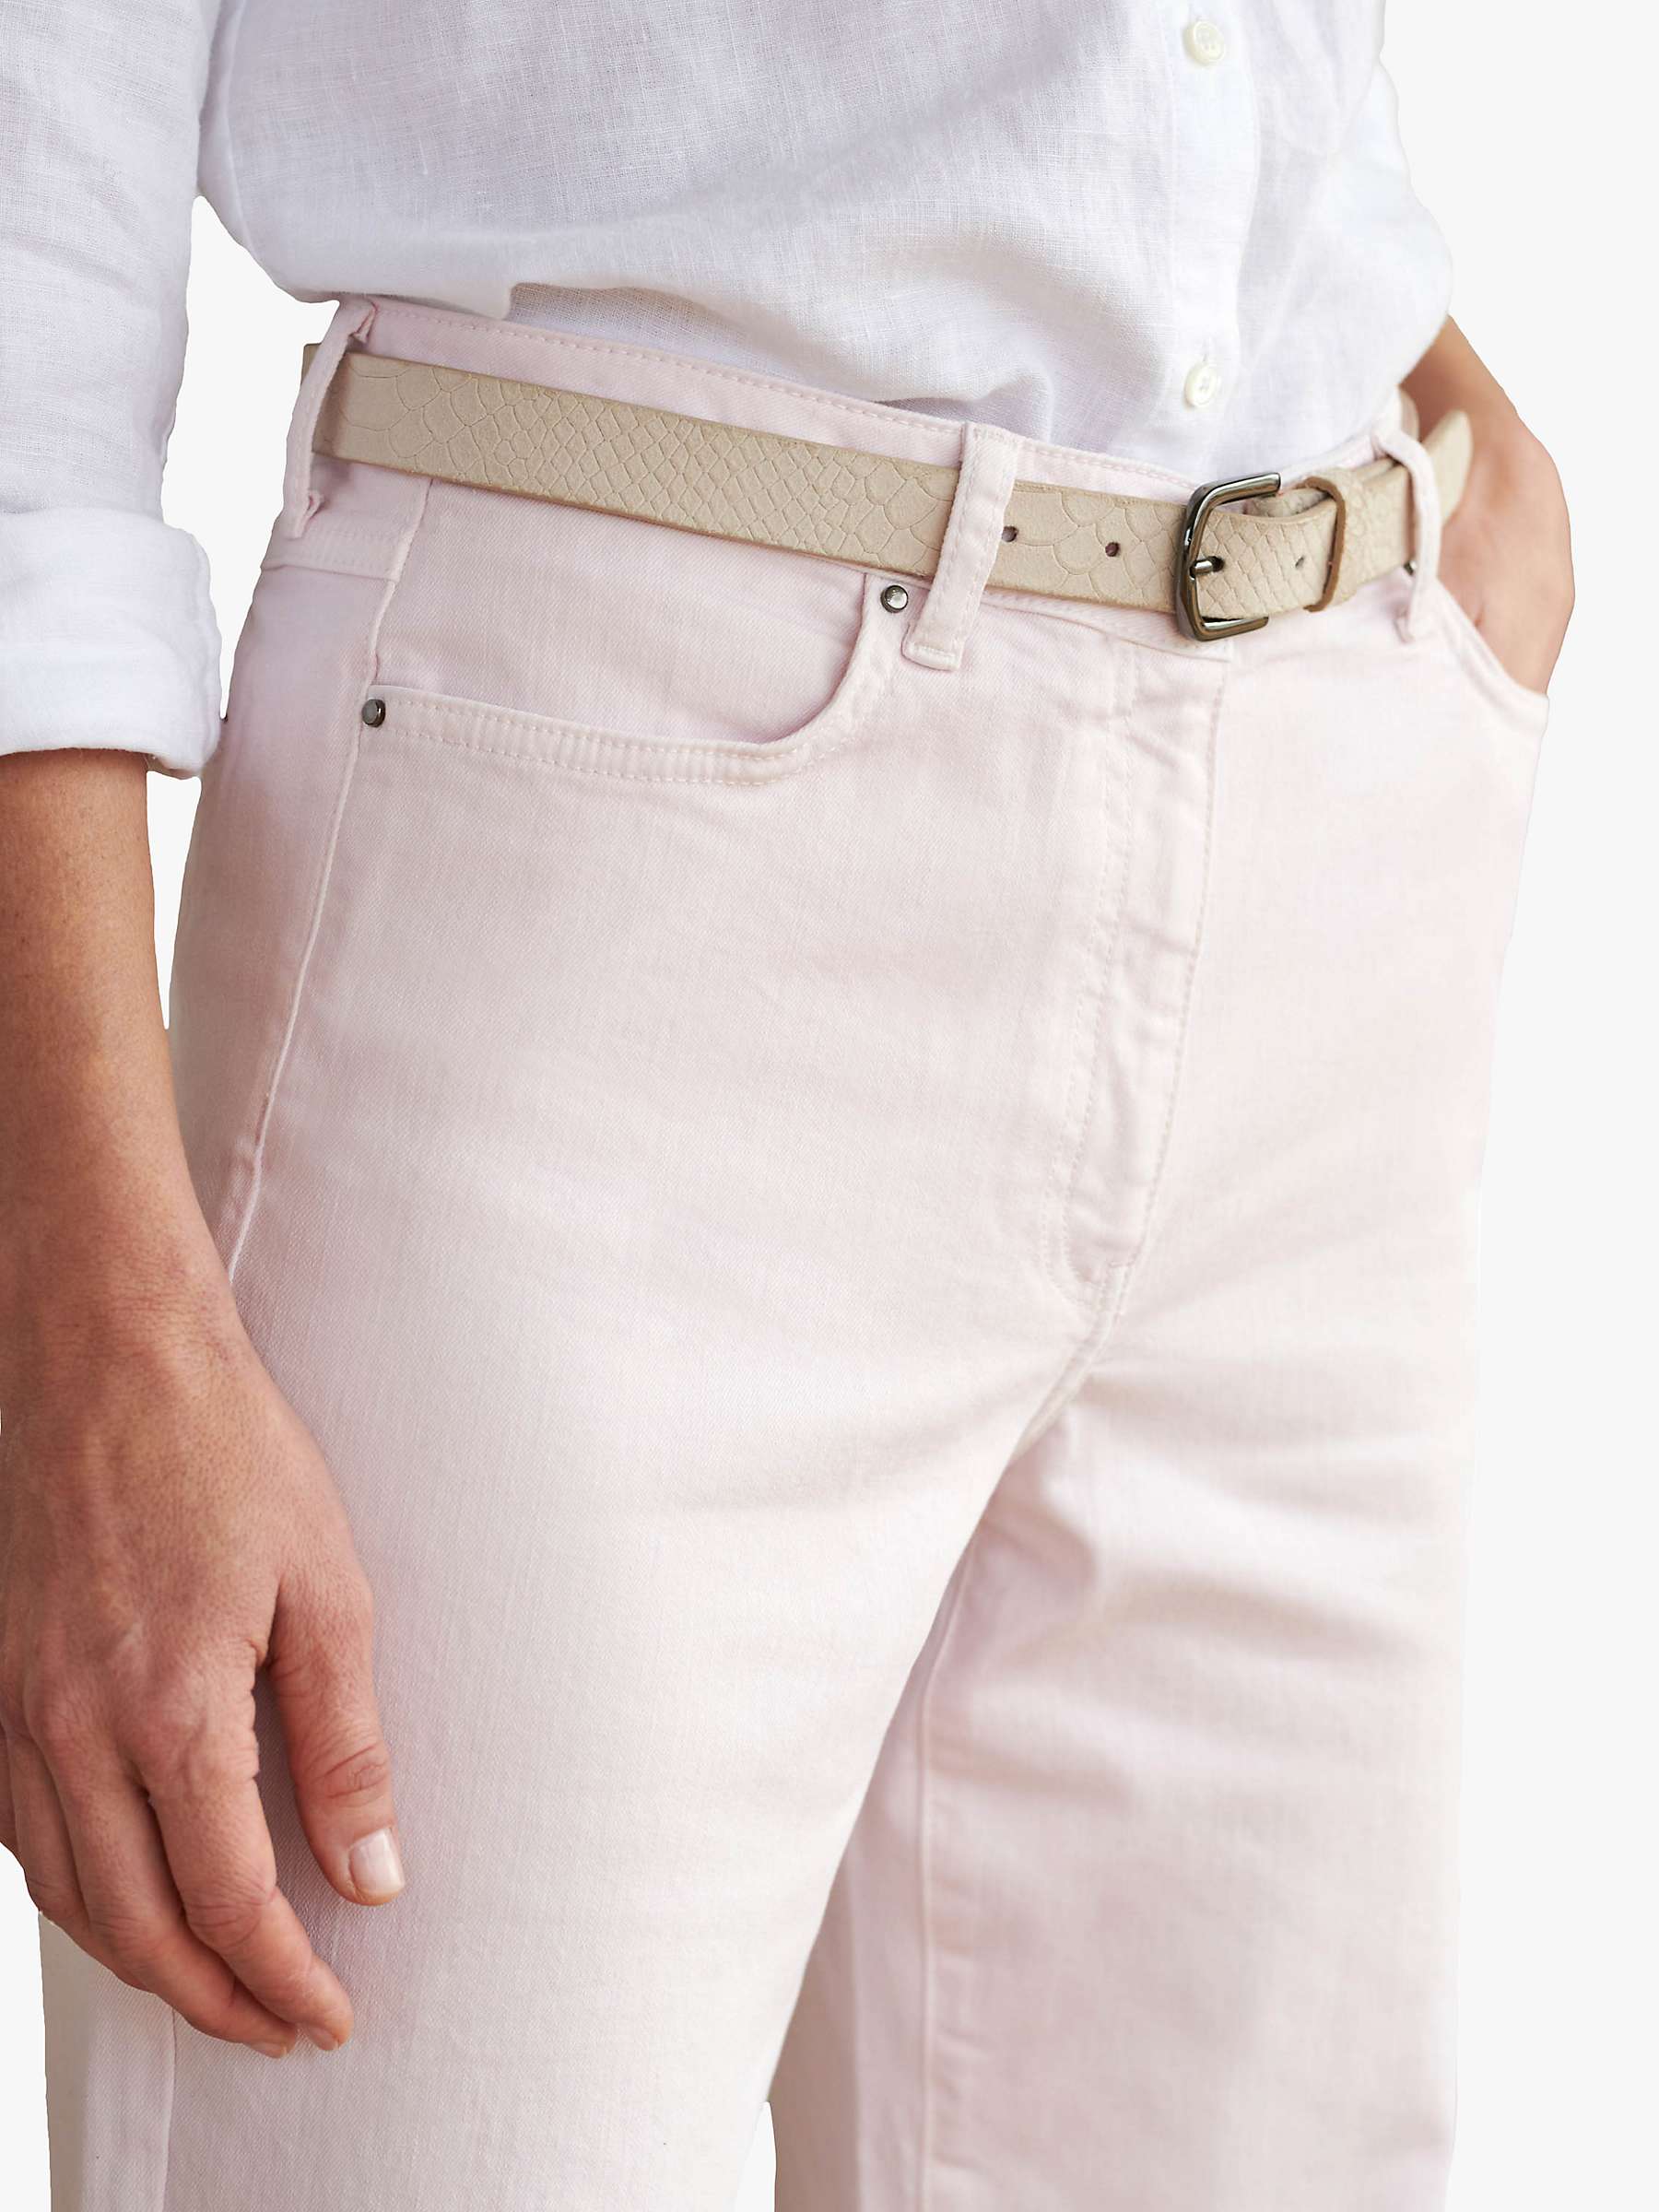 Buy Pure Collection Capri Trousers, Light Pink Online at johnlewis.com